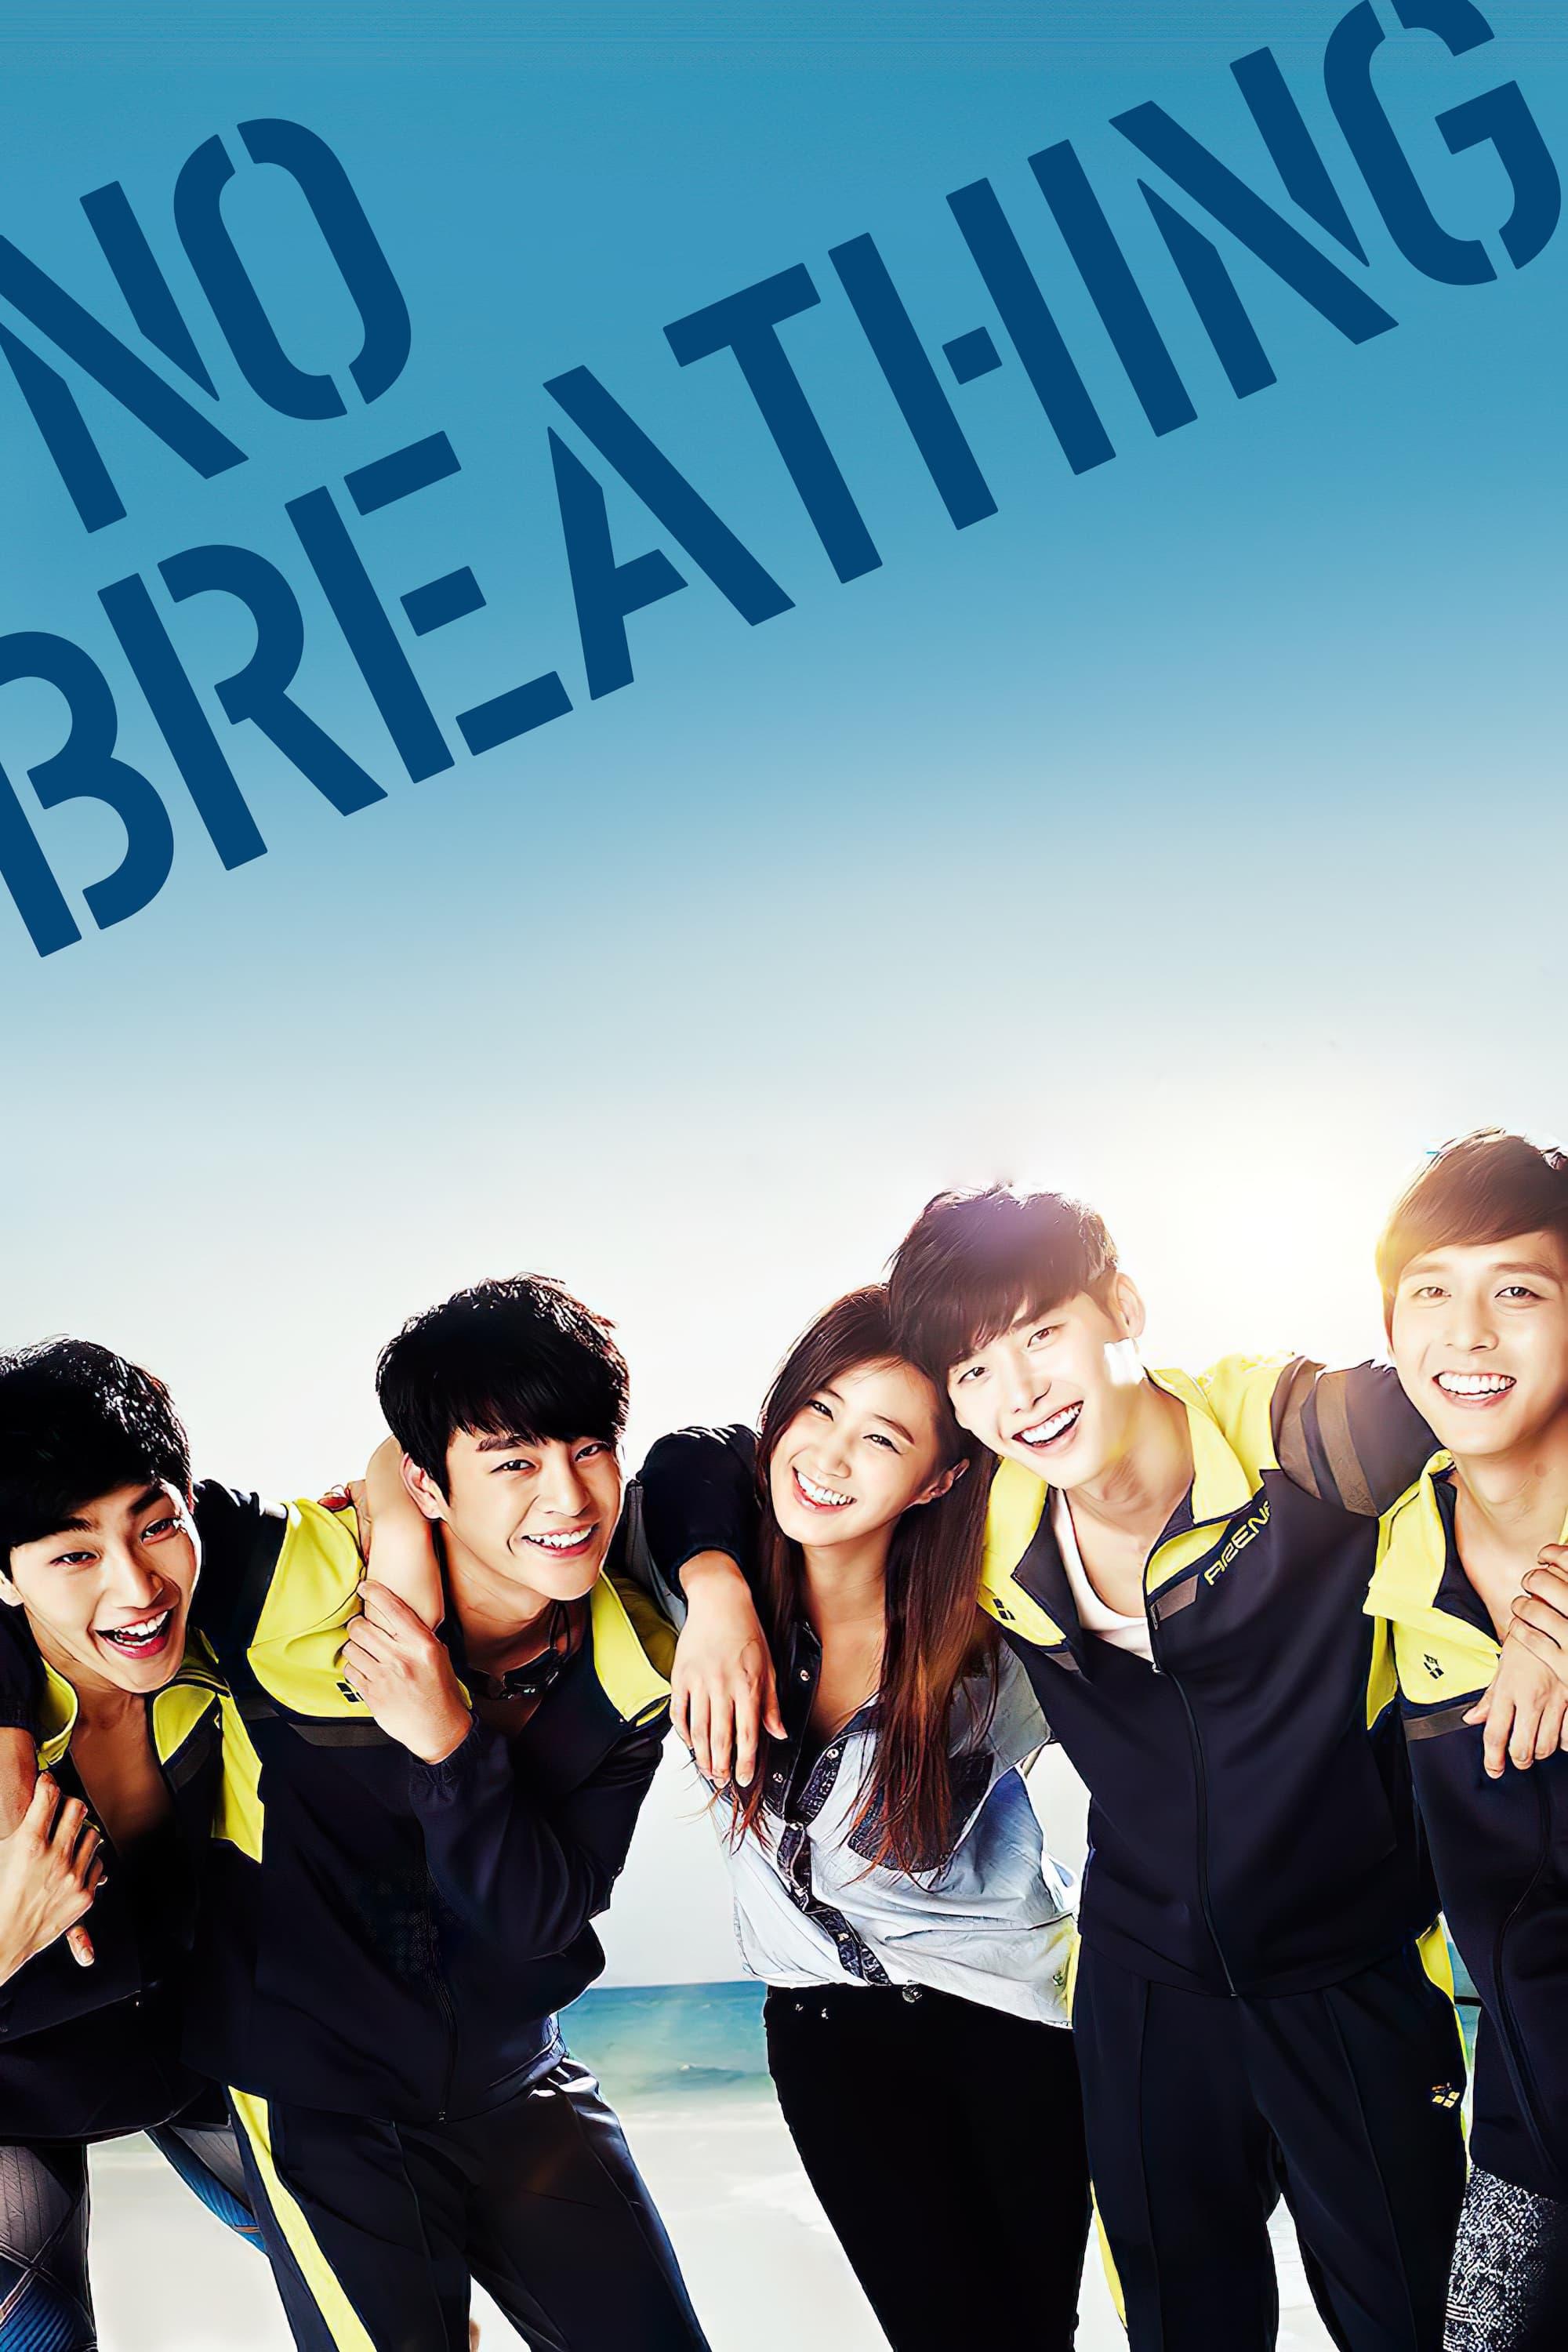 No Breathing poster